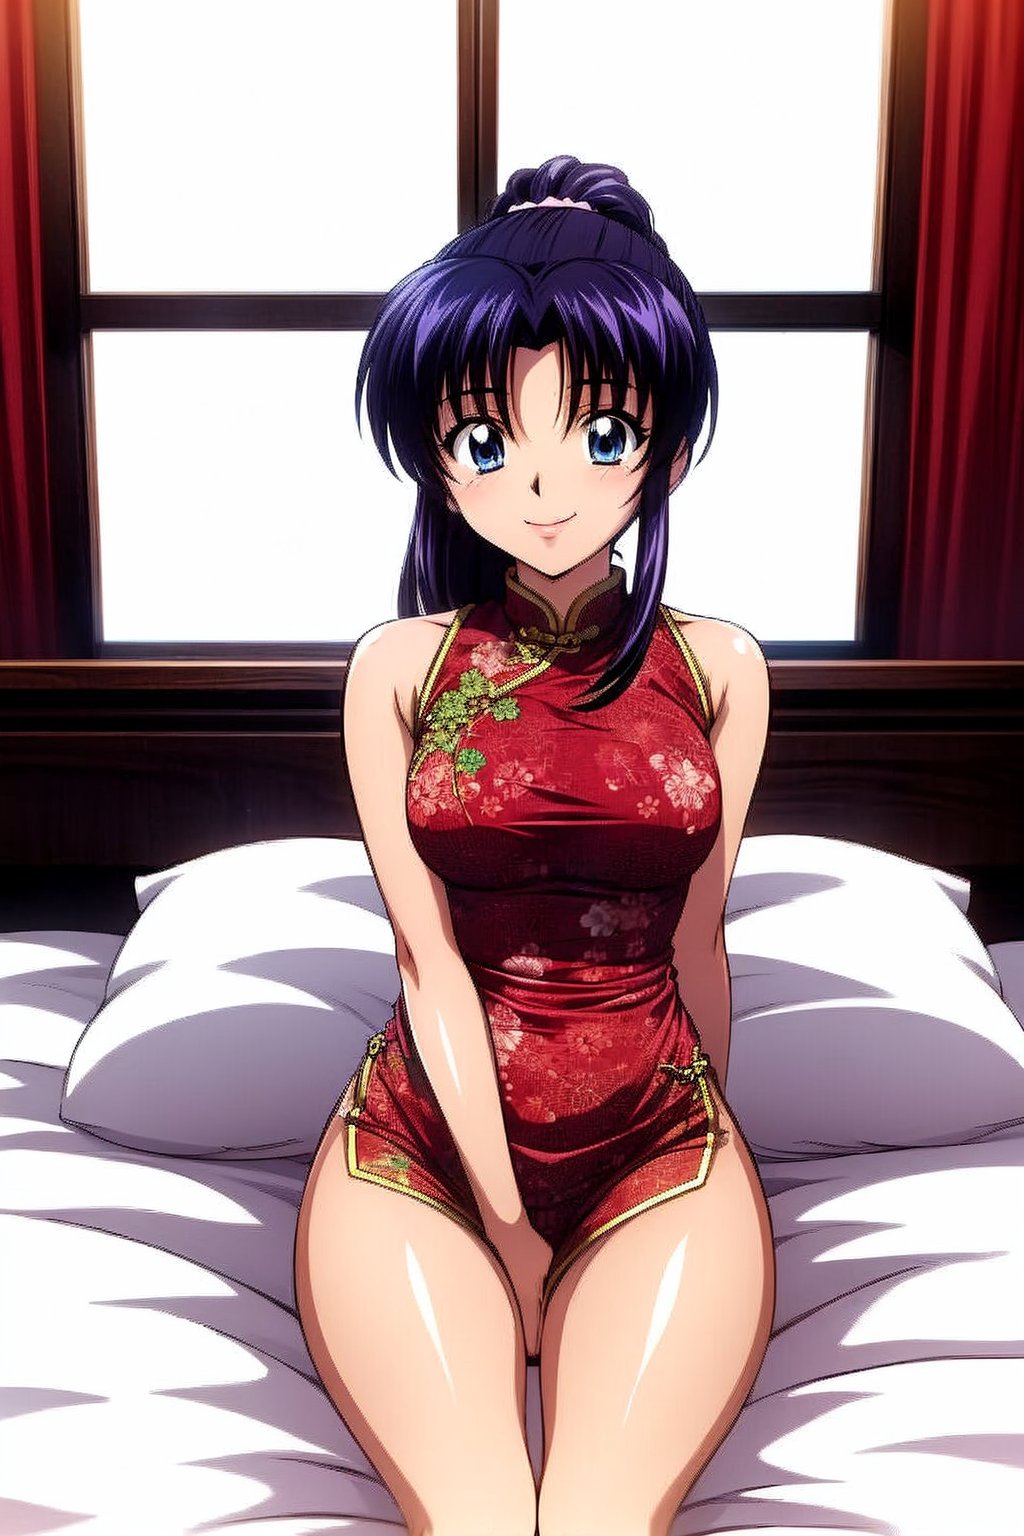 Kamiya kaoru 1996, solo, 1girl, beautiful 20 year old anime girl with: "athletic body, long legs, (properly proportioned female body), medium bust, blue eyes (smiling eyes), black hair, long hair tied with bow in a high ponytail"; wear chinese clothes; smiling shyly, sleep on bed, in royal  room; in high quality, sakura_pattern, Kamiya Kaoru 1996